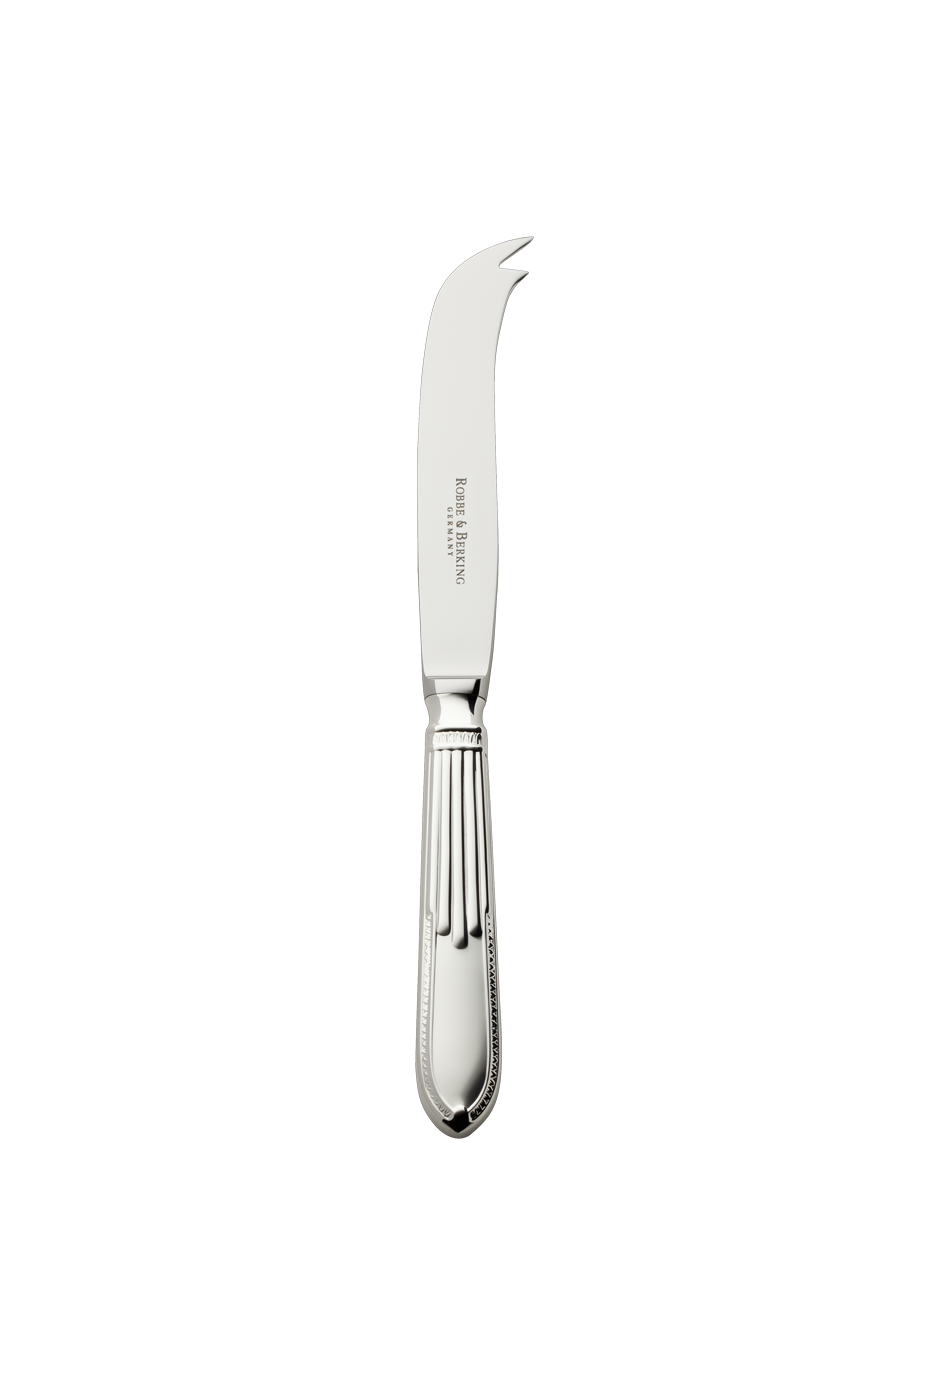 Belvedere Cheese Knife (150g massive silverplated)